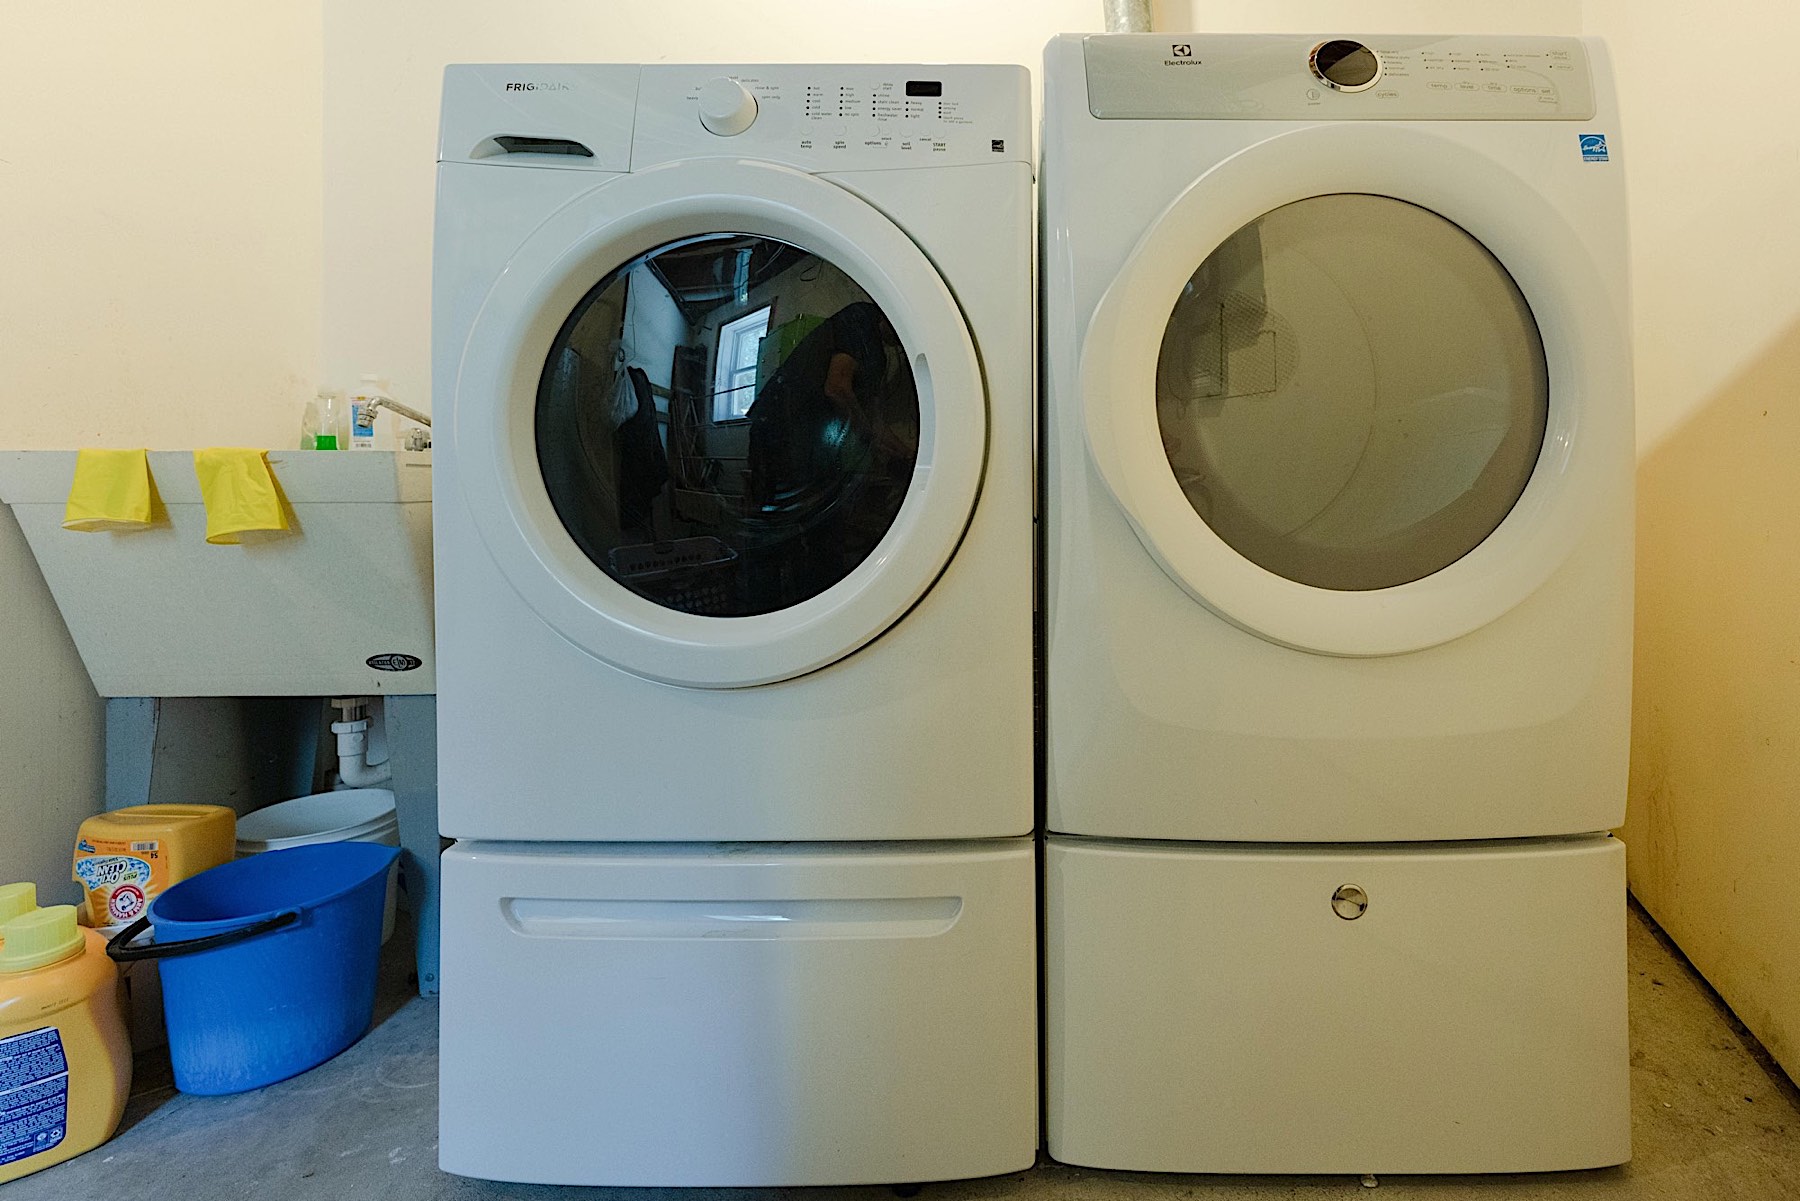 Washer and dryer in the utility room